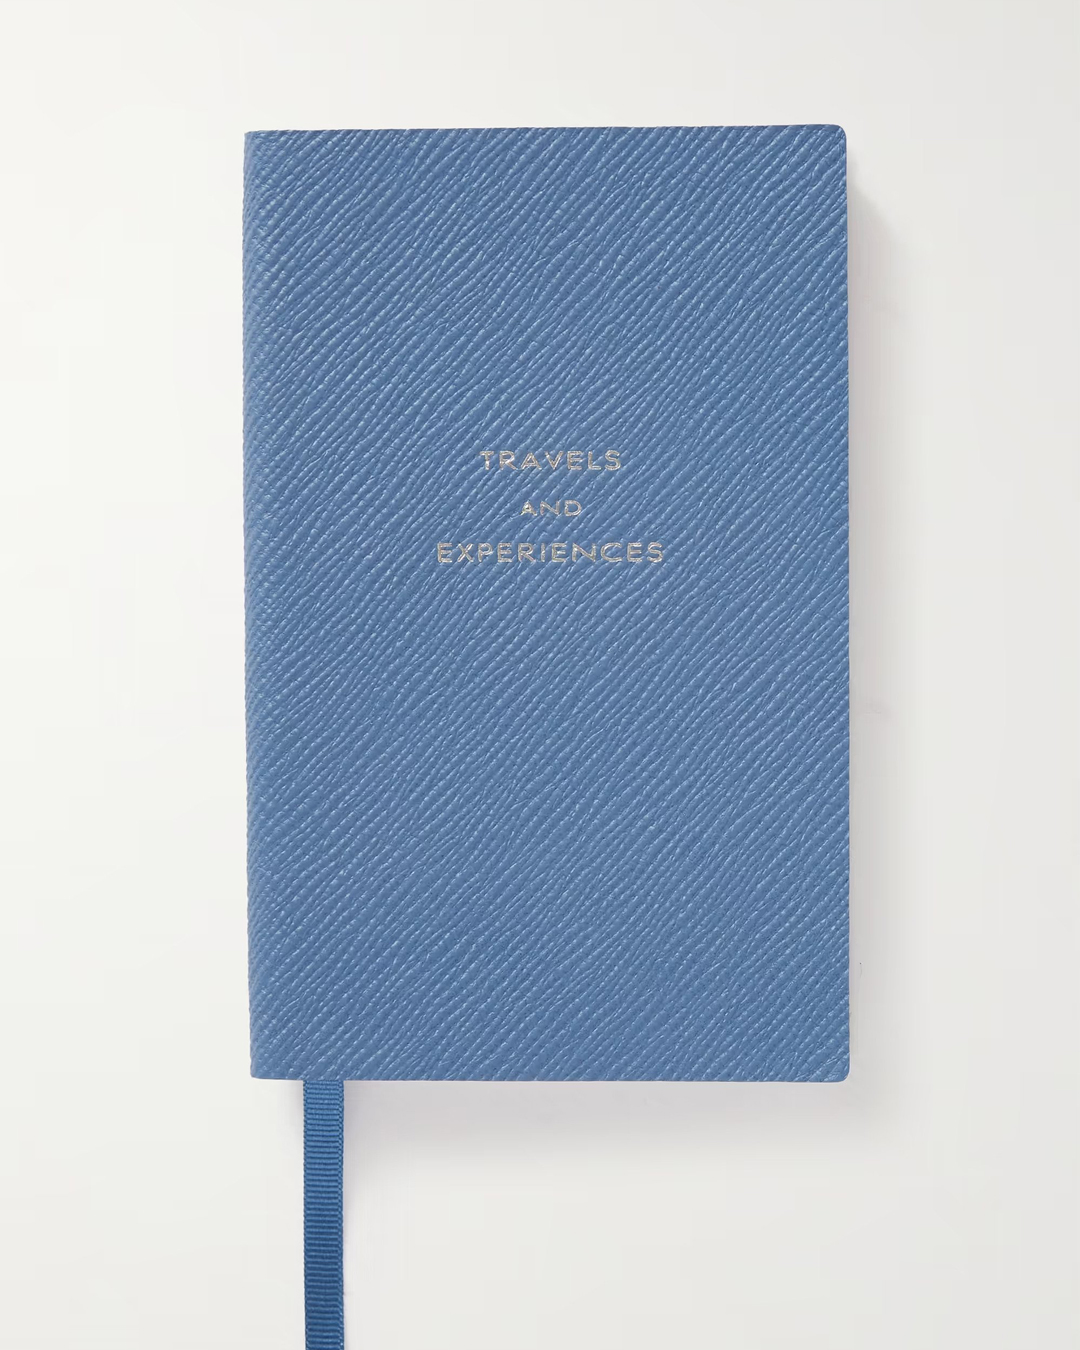 A blue textured notebook with 'travels and experiences' embossed in silver.